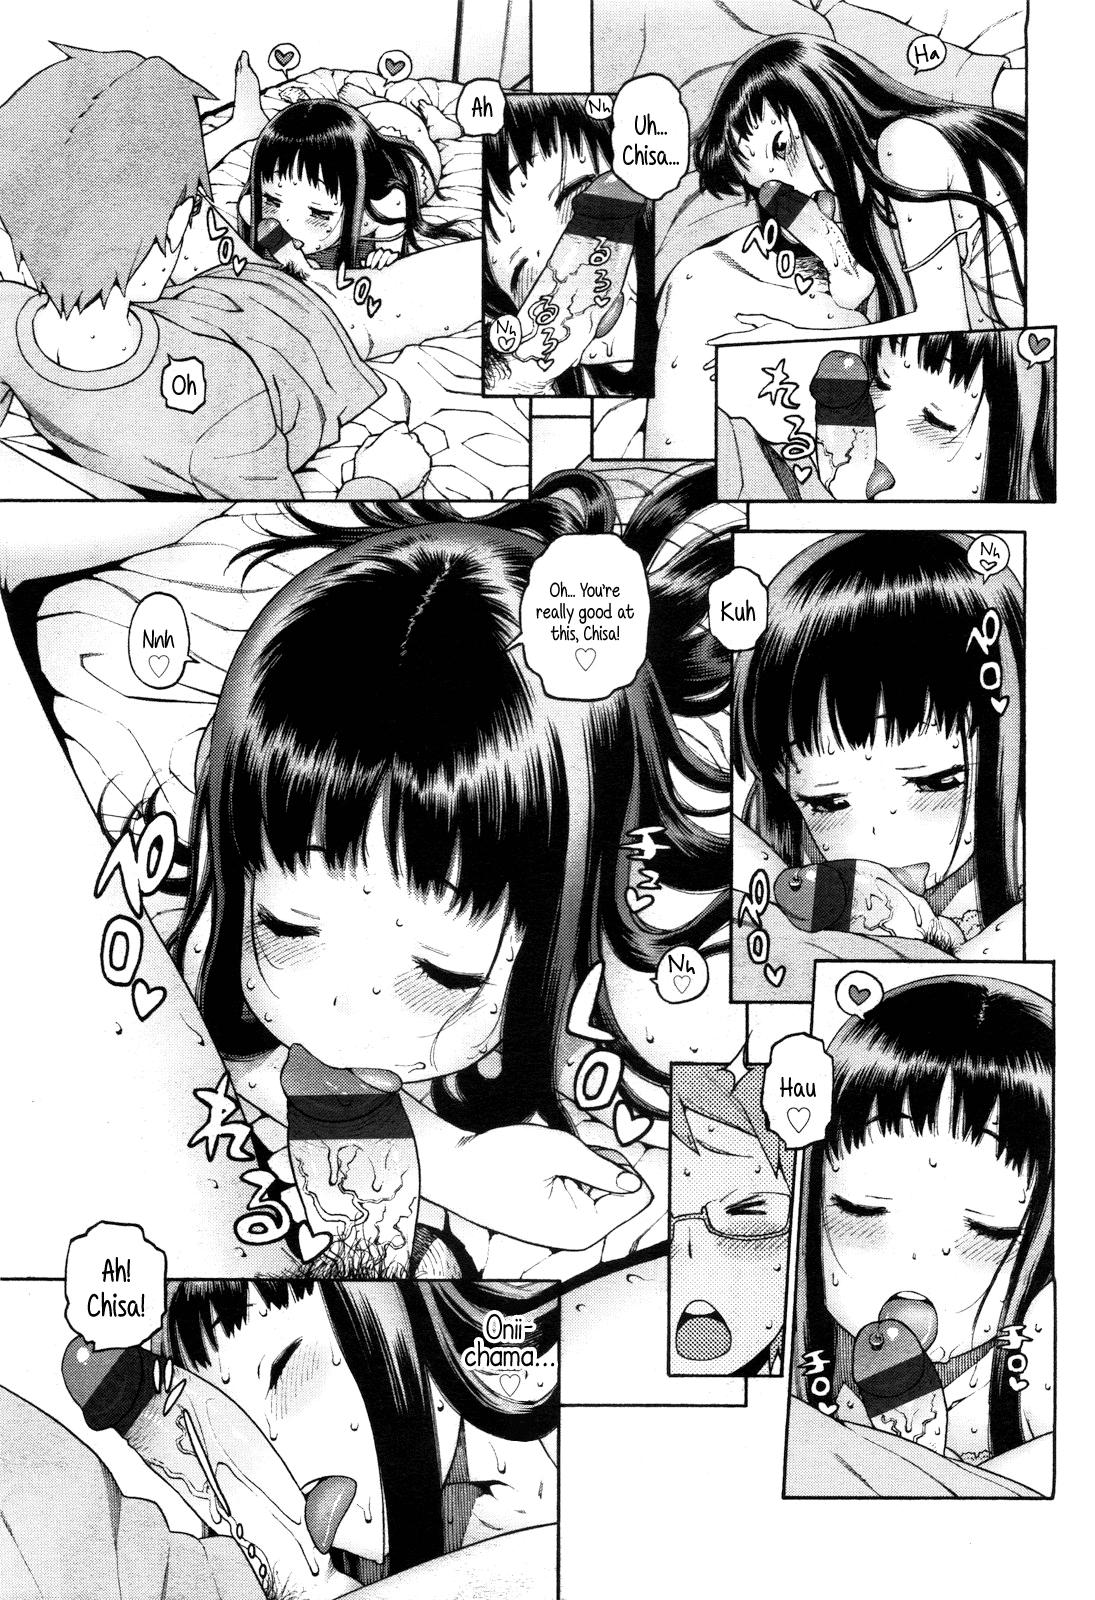 Rough Sex Porn Chisa to Oniichama | Chisa and Onii-chama Lover - Page 11